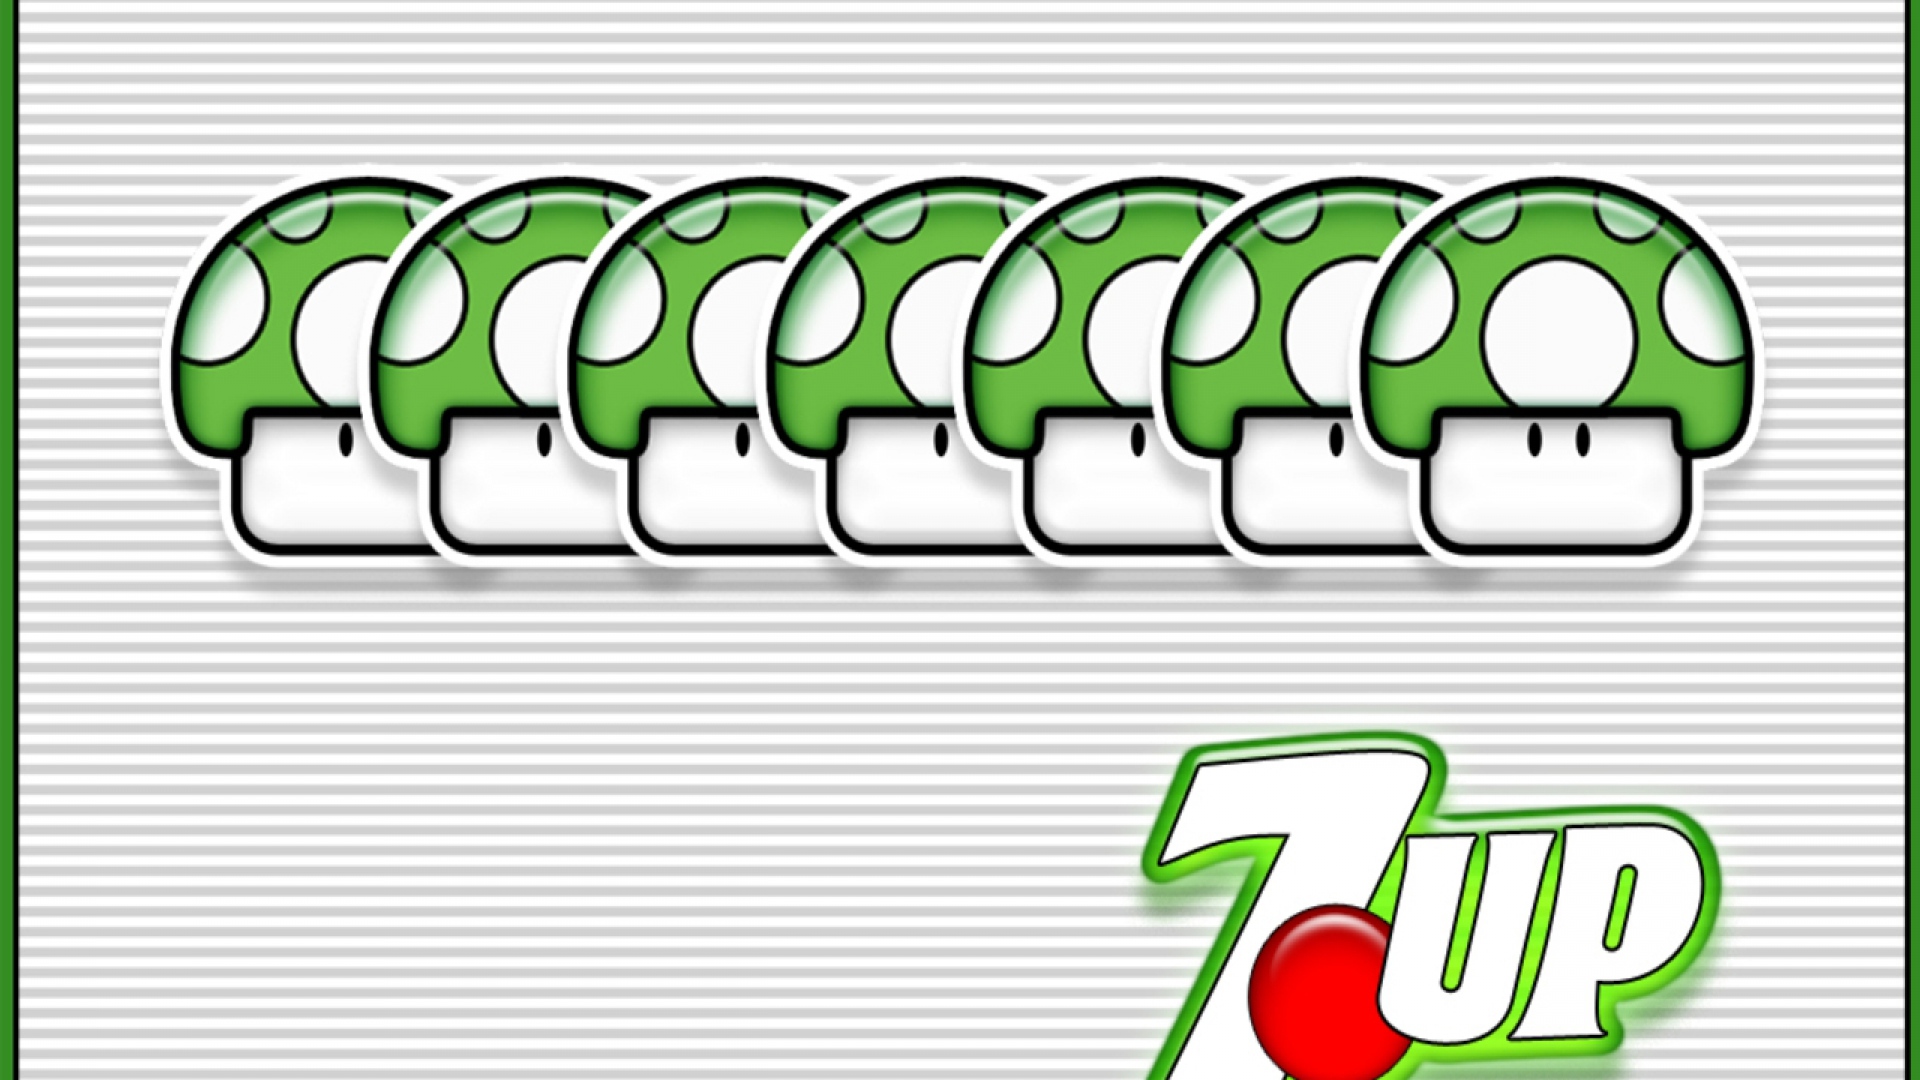 Products 7Up HD Wallpaper | Background Image